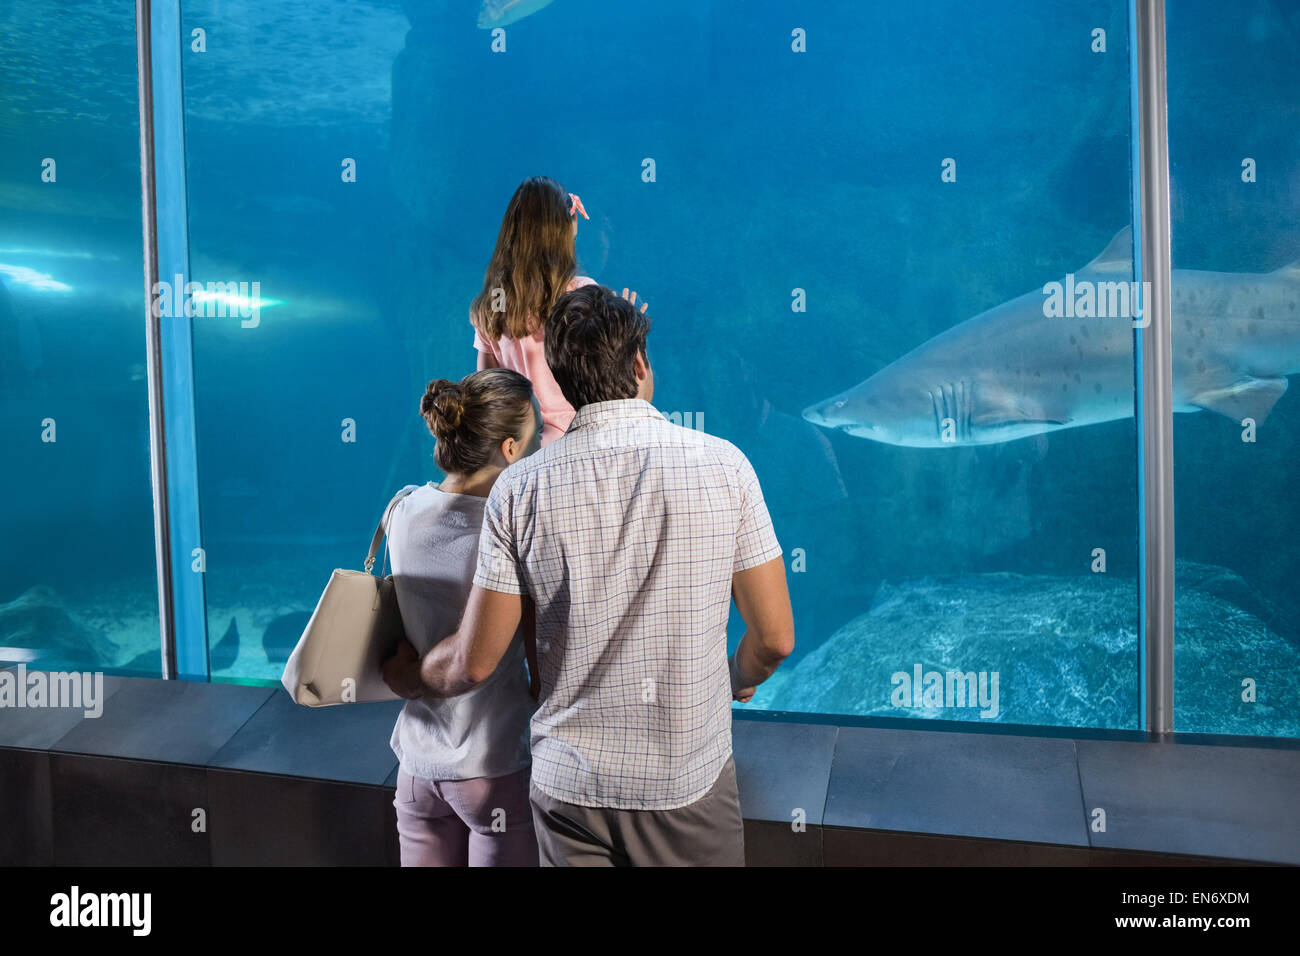 Happy Family looking at fish tank Banque D'Images